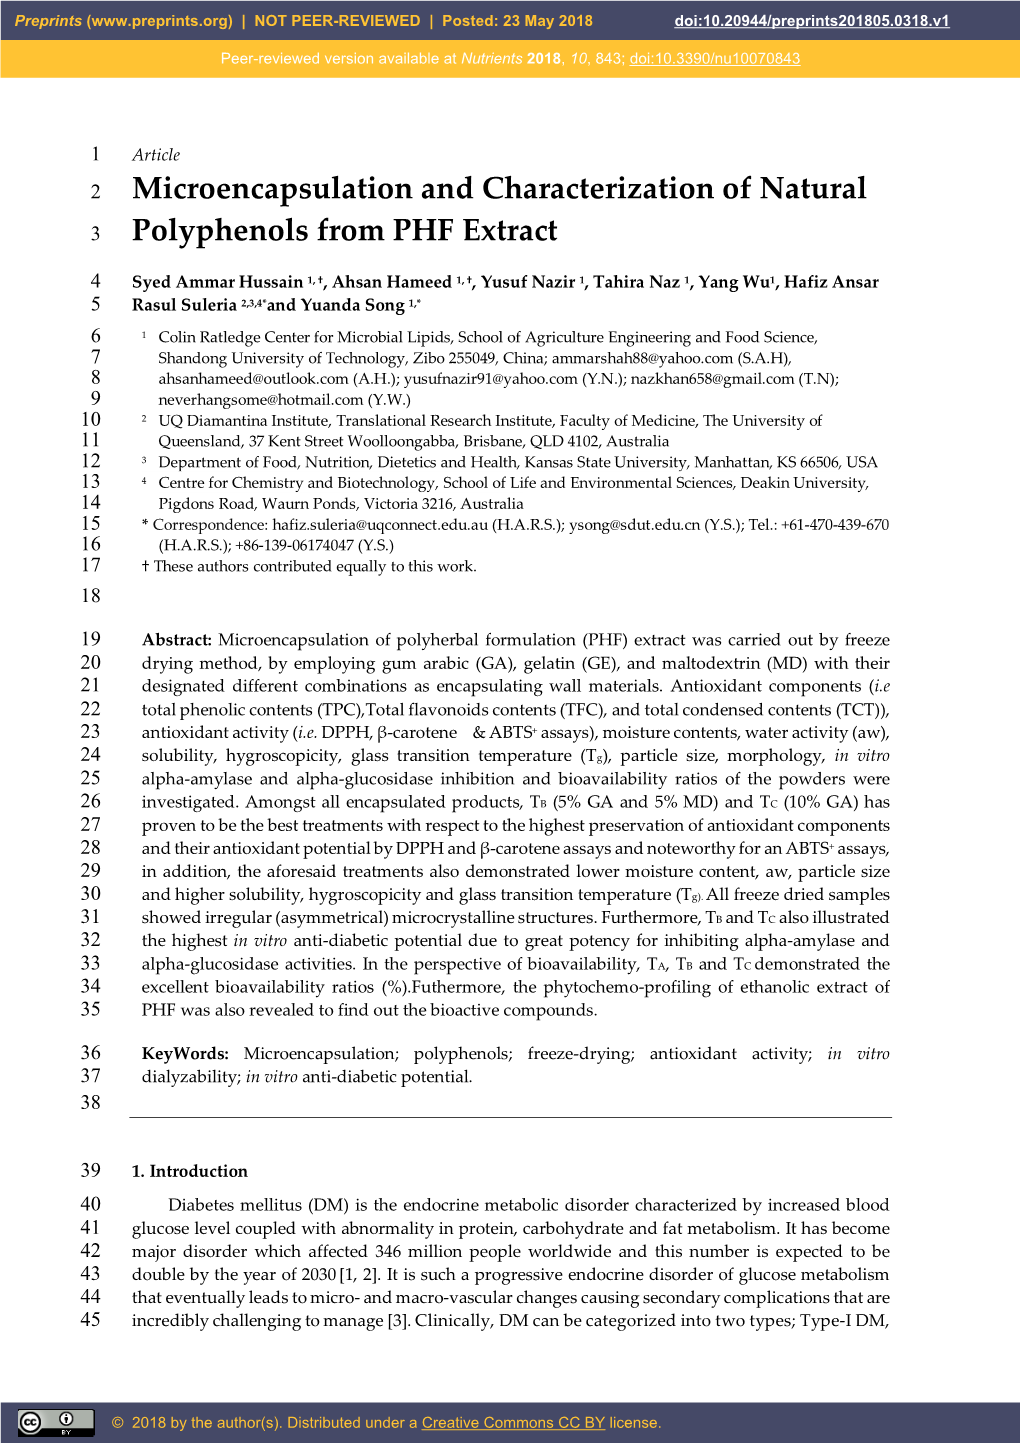 Microencapsulation and Characterization of Natural 3 Polyphenols from PHF Extract